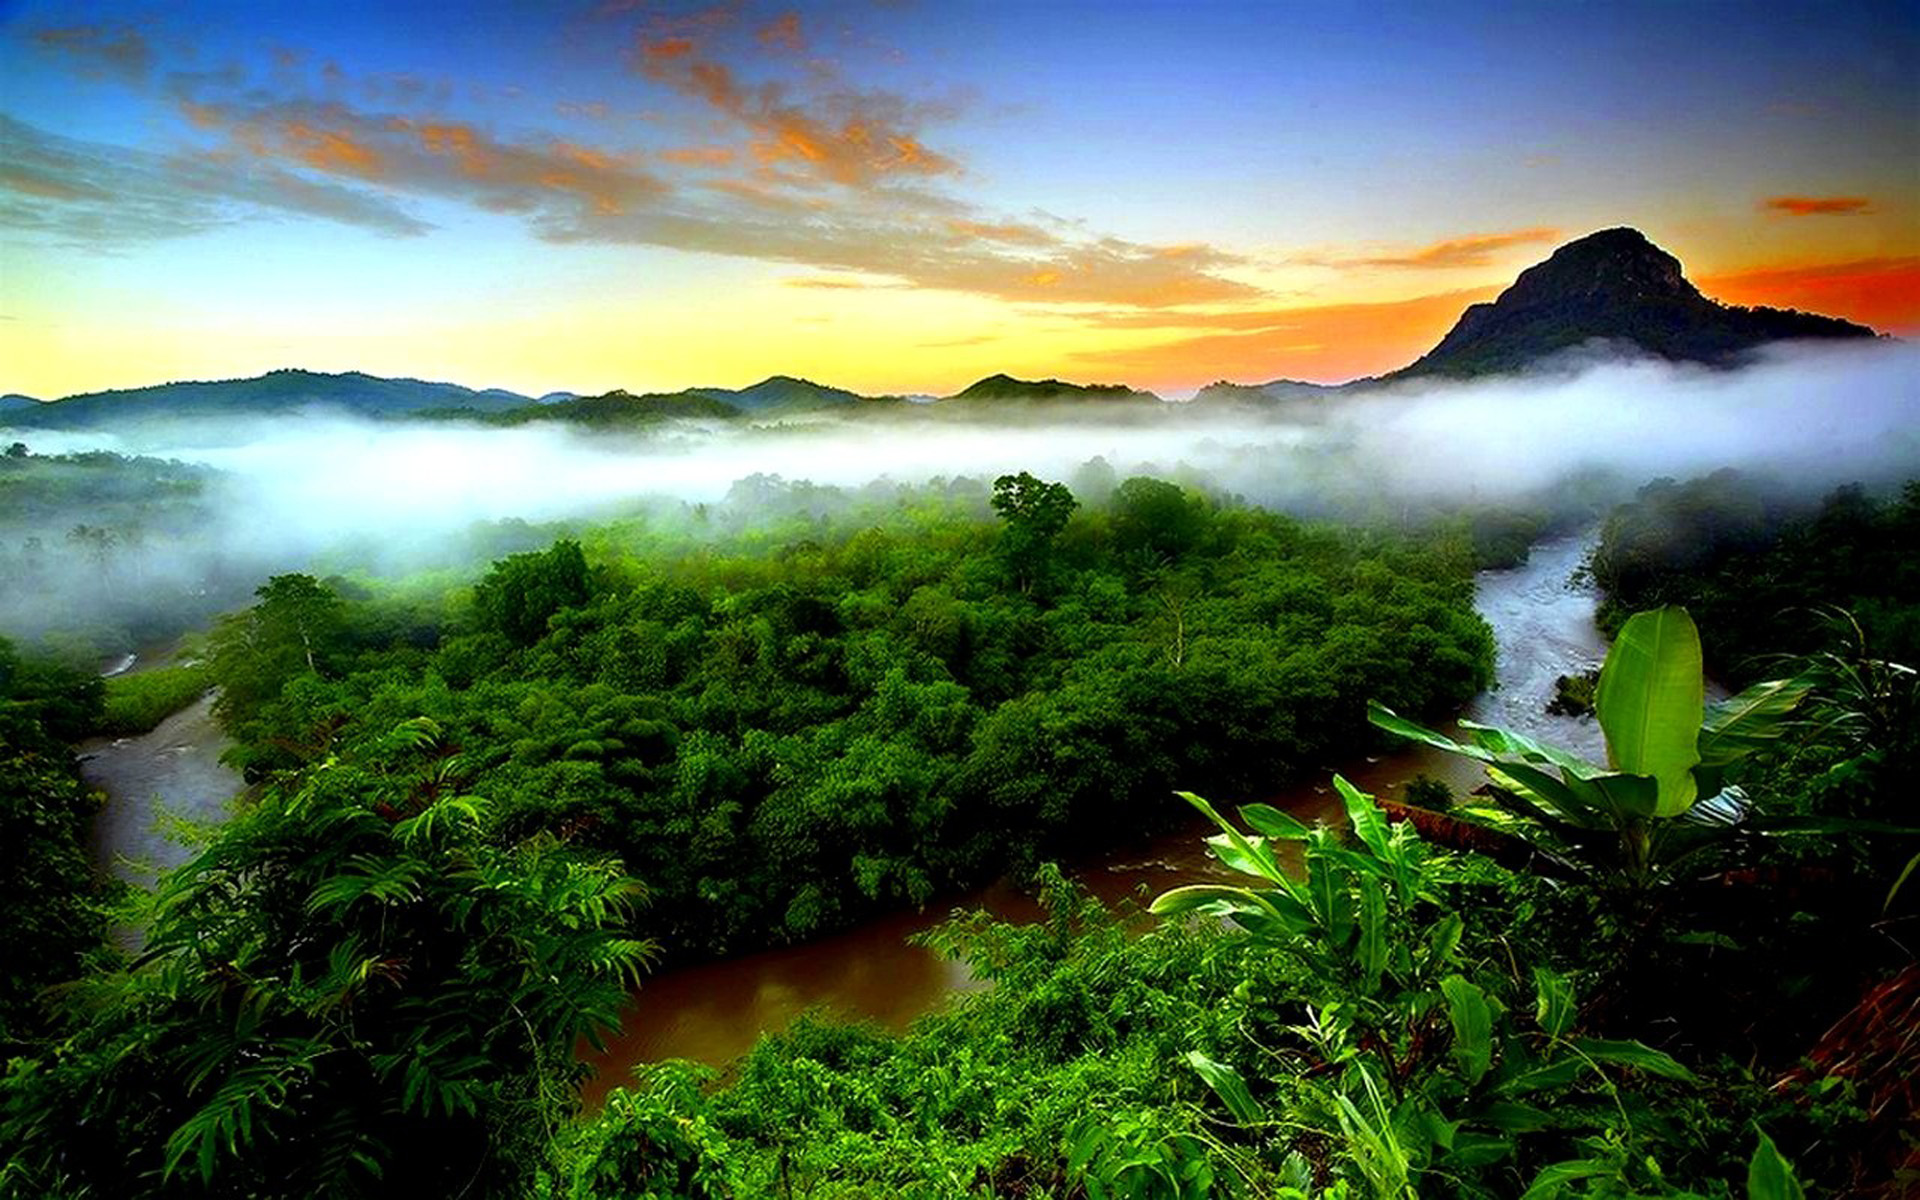 Tropical Rainforest Of Indonesia - HD Wallpaper 